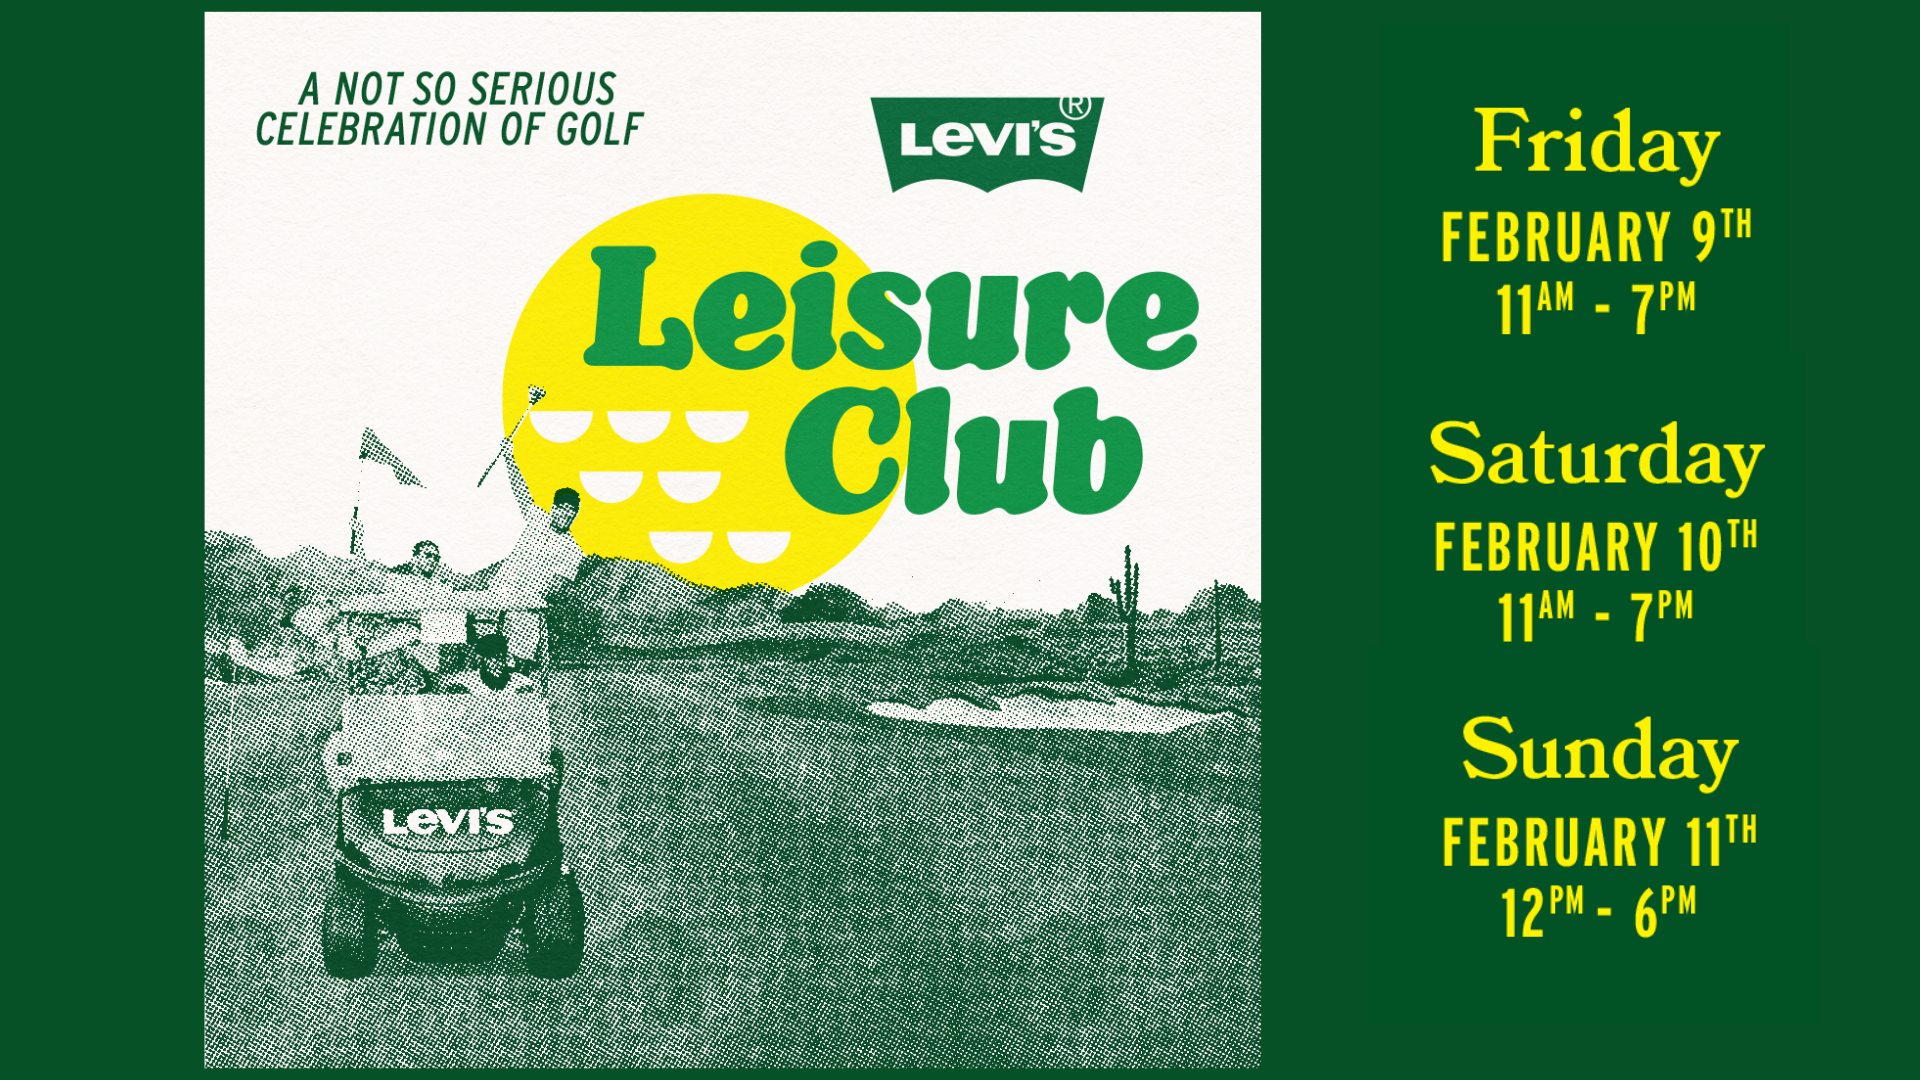 people hanging out of a golf cart driving down the golf course with a yellow golf ball image in the background with text tat says, "A not so serious celebration of golf" and "Levi's Leisure Club"